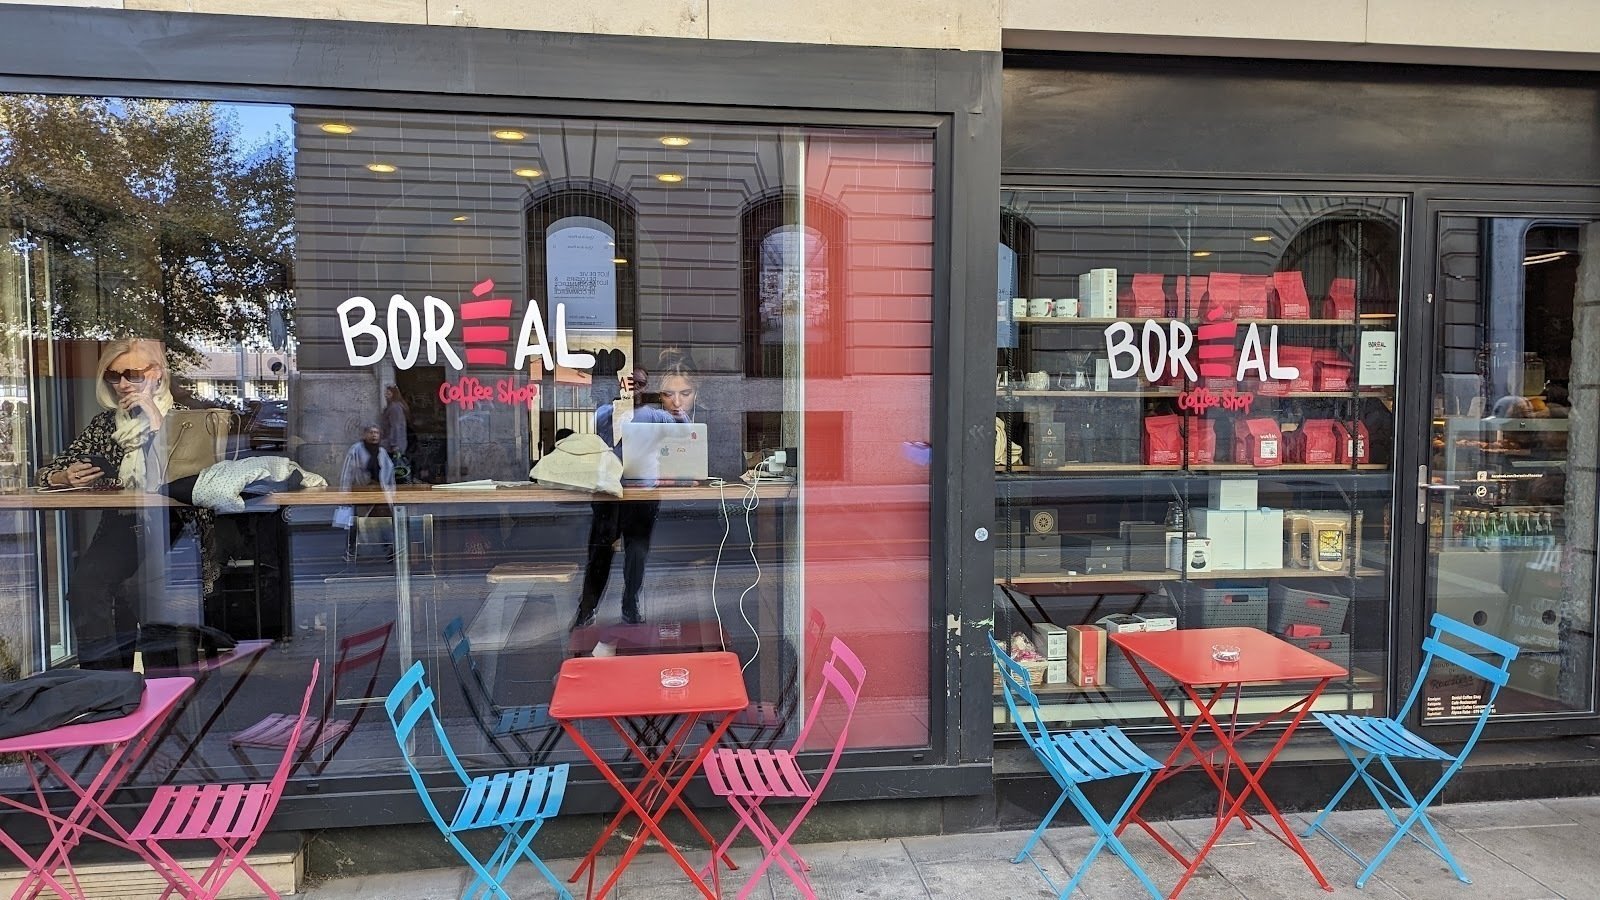 <span class="translation_missing" title="translation missing: en.meta.location_title, location_name: Boréal Coffee Shop @ Rue du Stand, city: Geneva">Location Title</span>